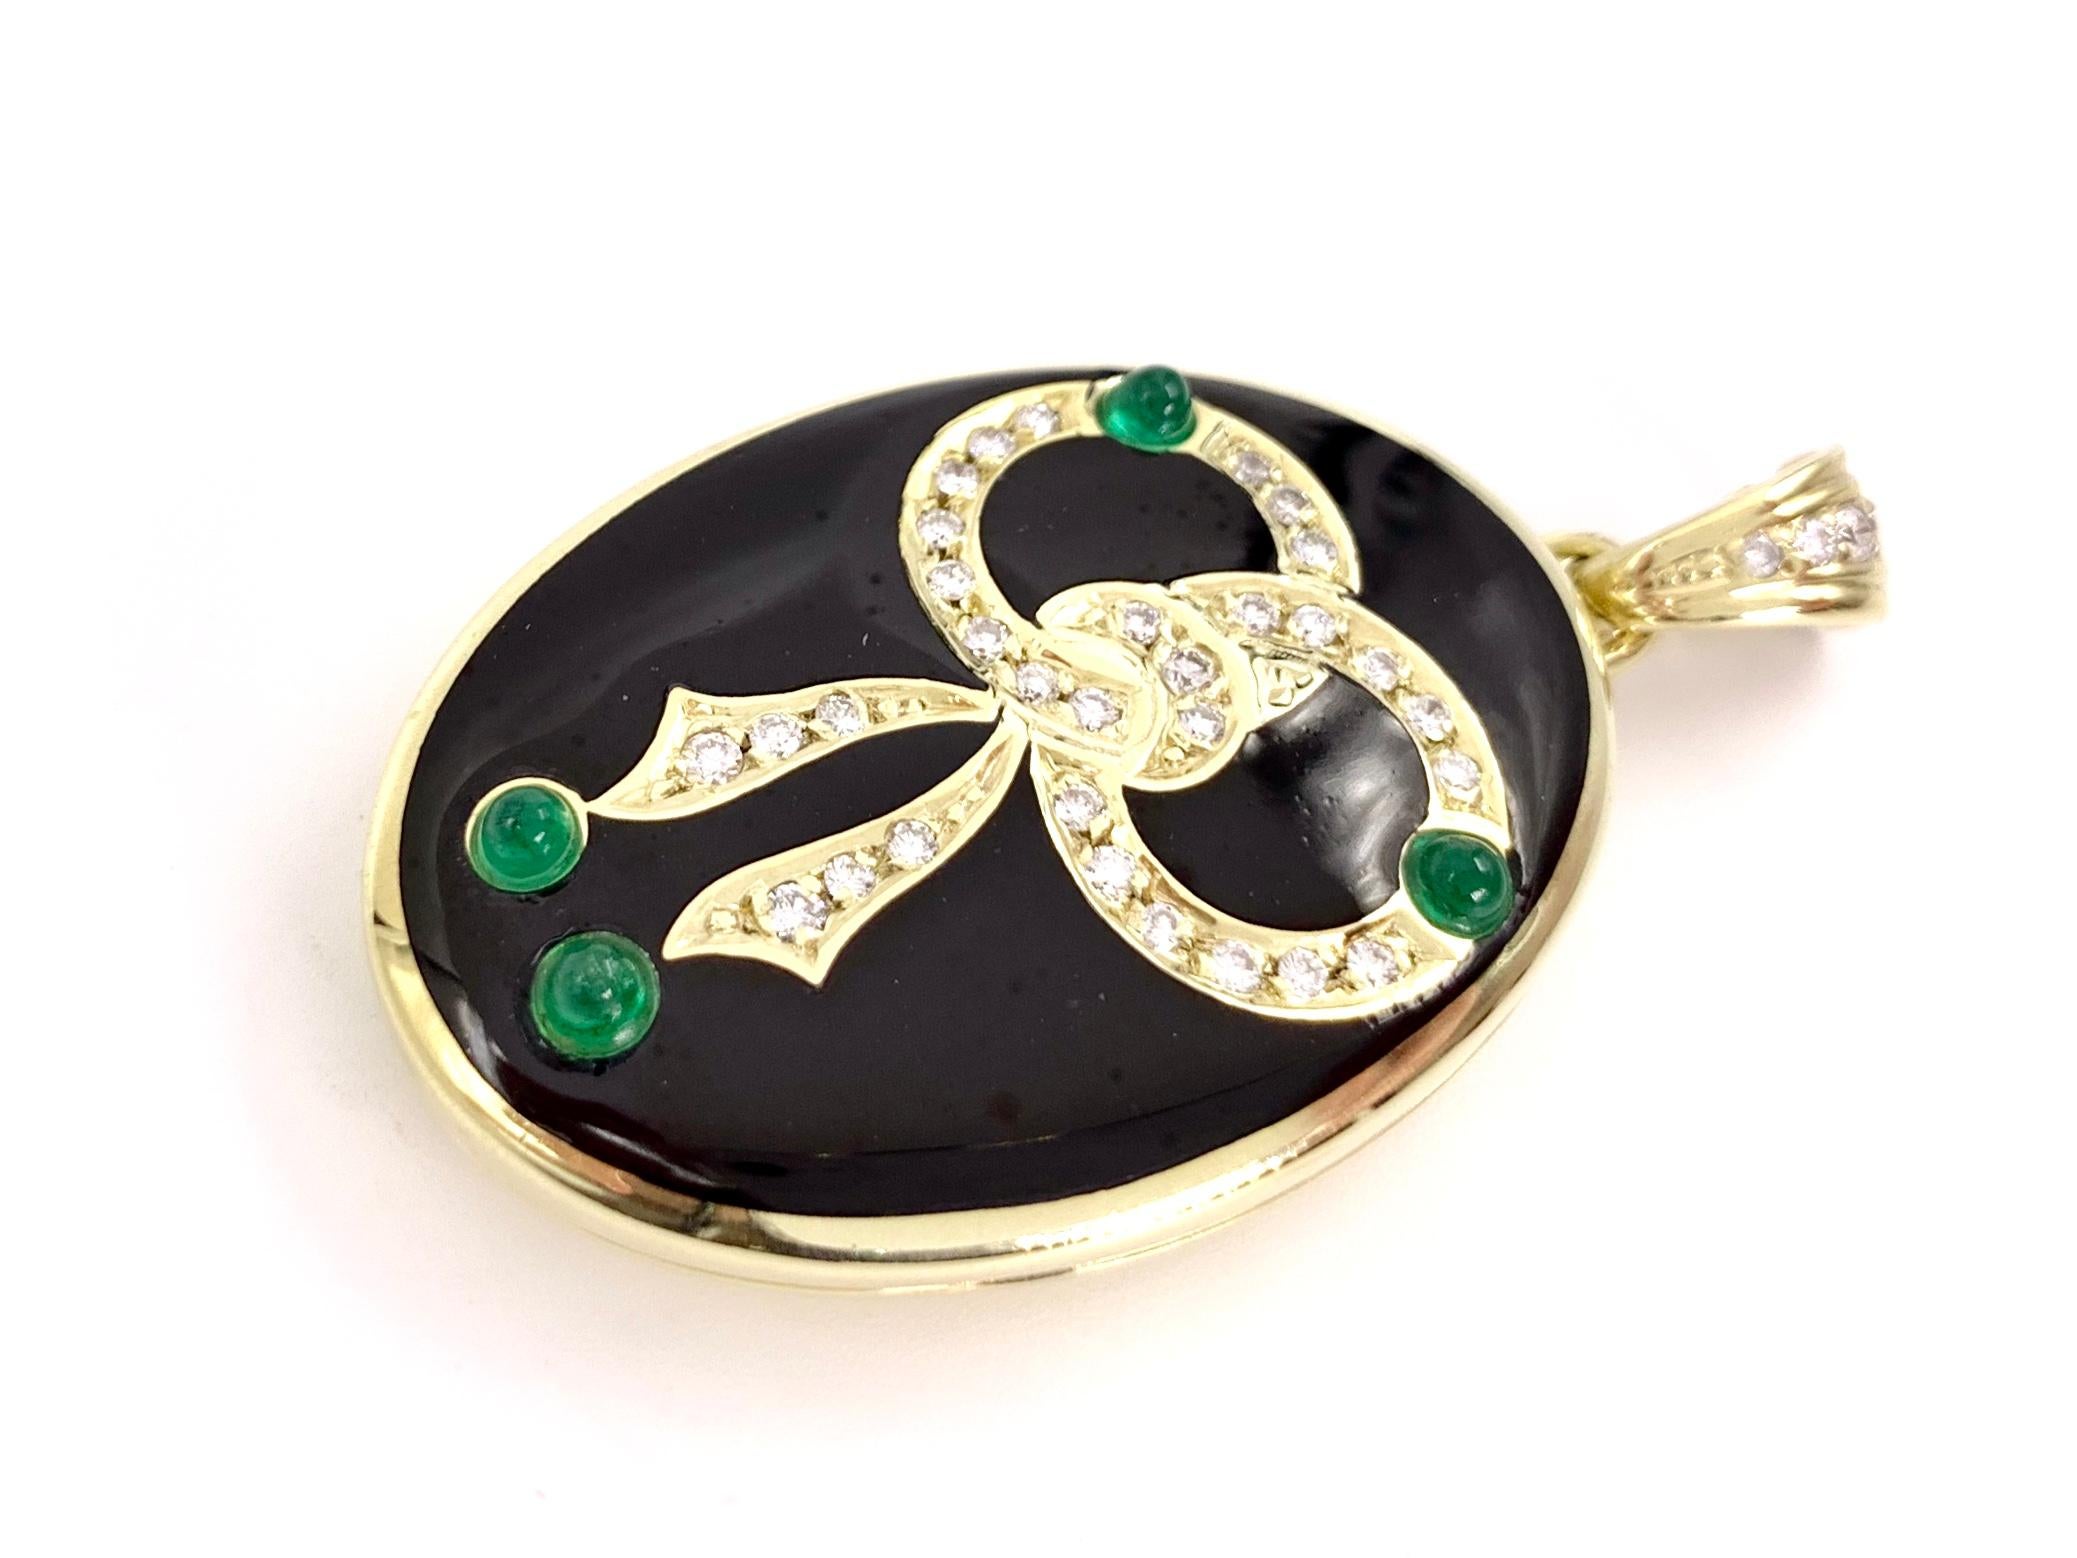 14 Karat yellow gold oval vintage bow locket featuring .40 carats of round brilliant diamonds, four vivid cabochon green emeralds and polished, smooth black enamel. Diamonds are approximately G color, VS2 clarity. Gold and diamond bale is equipped